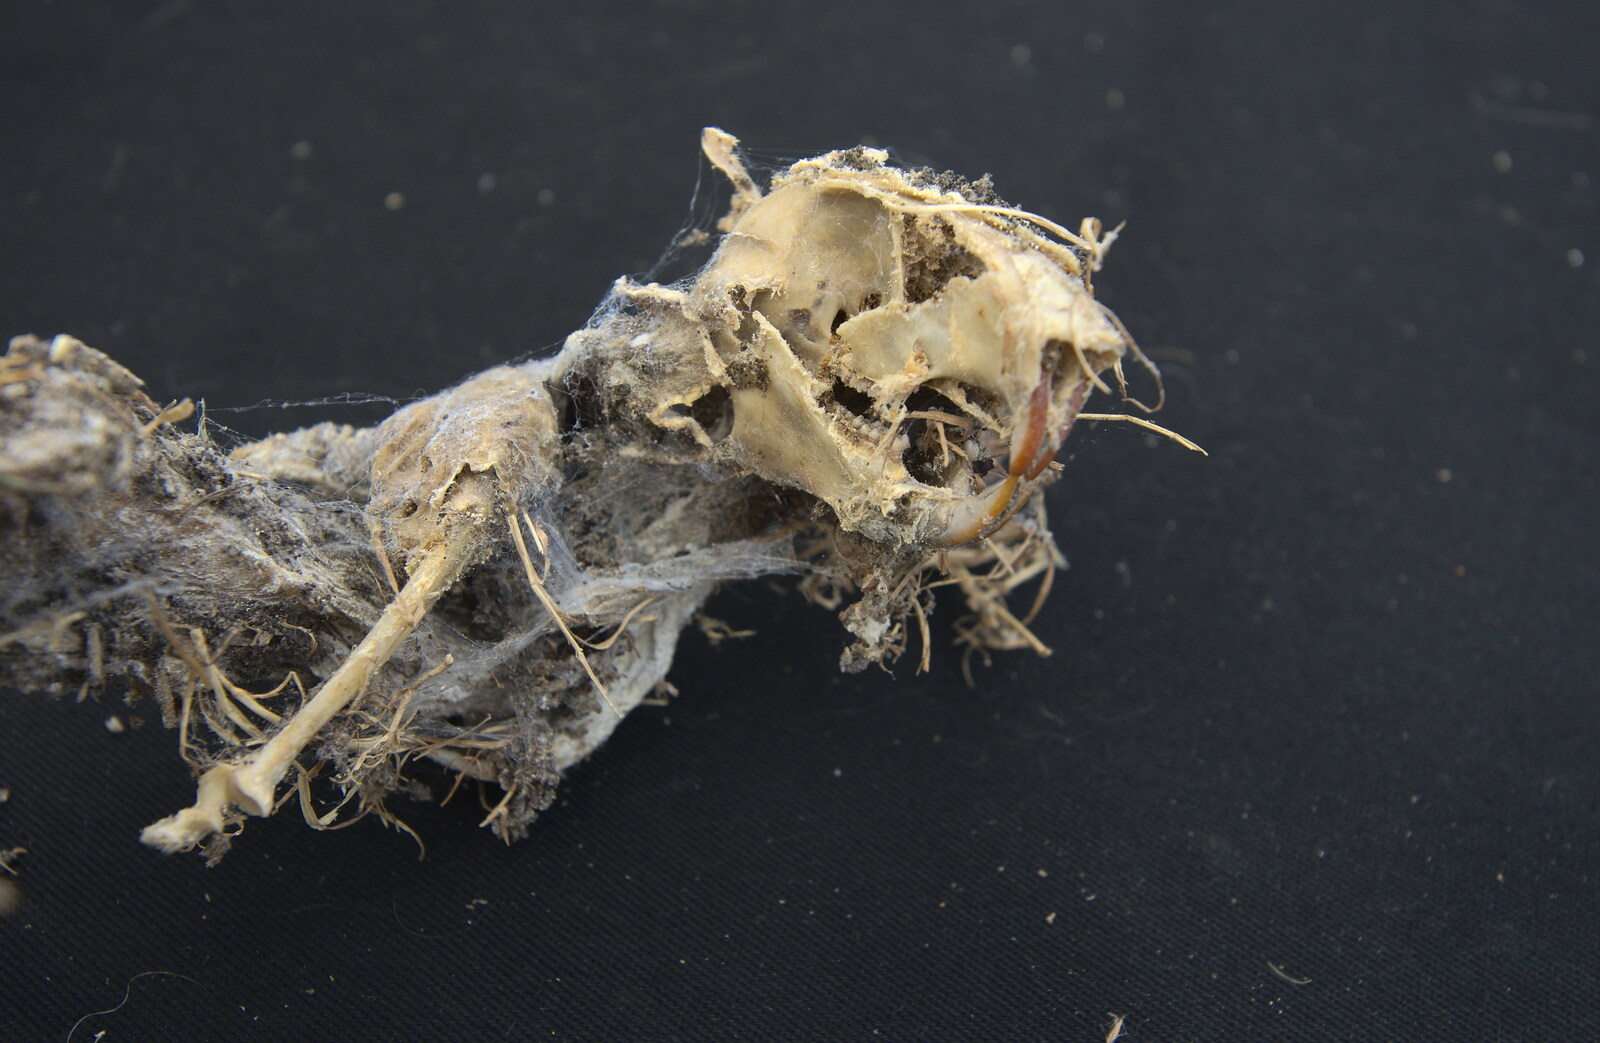 A squirrel skull from The BSCC at Pulham Crown, and Grandad with a Grinder, Brome, Suffolk - 11th July 2013